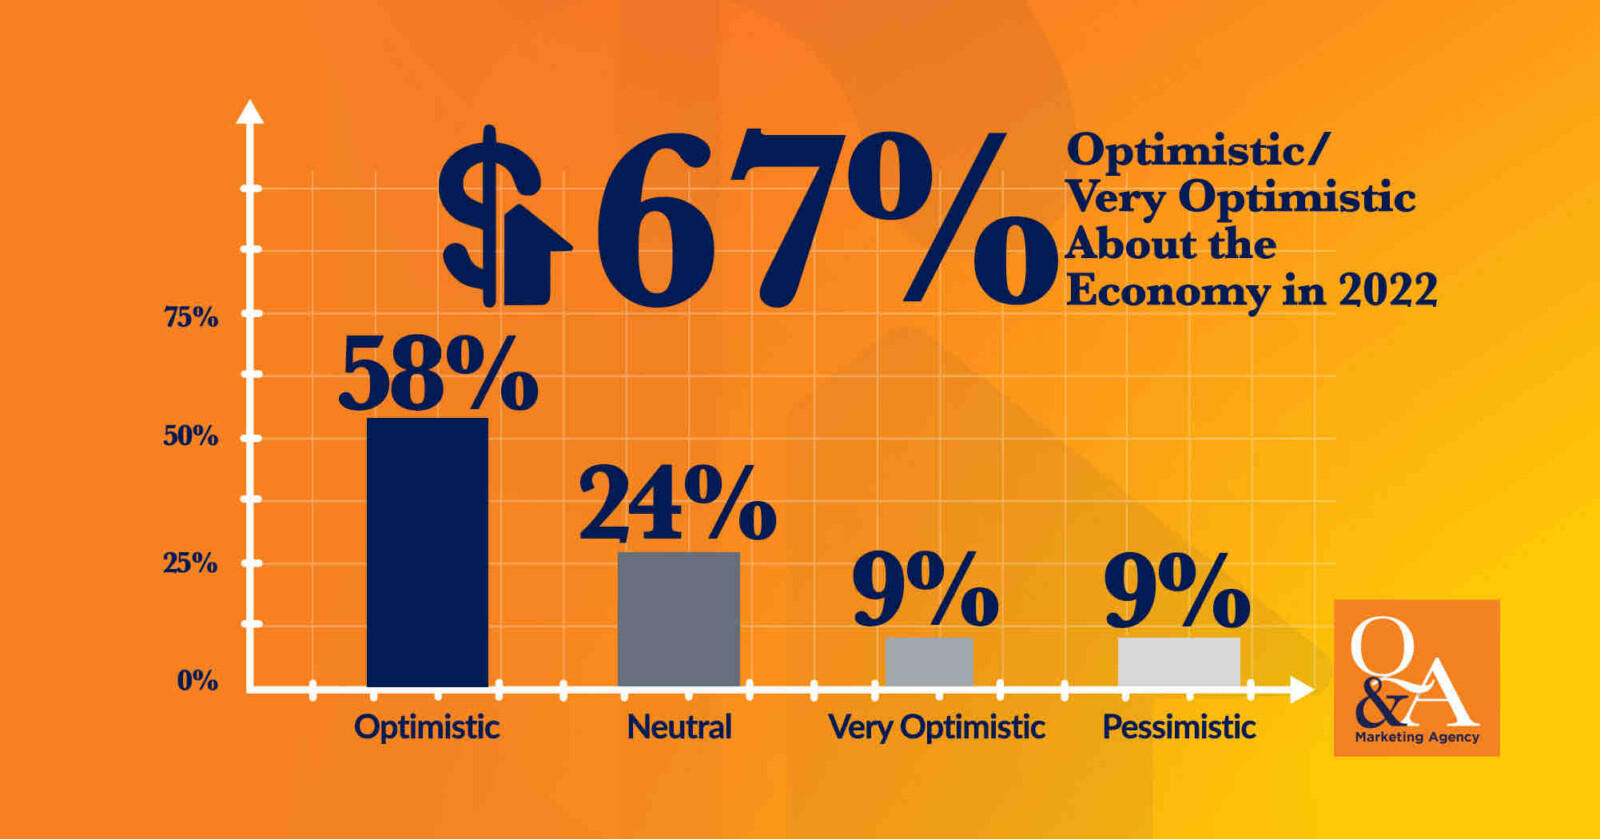 Outlook on the 2022 Economy Infographic - Quenzel Marketing Agency's 2022 Business and Marketing Outlook Survey Results